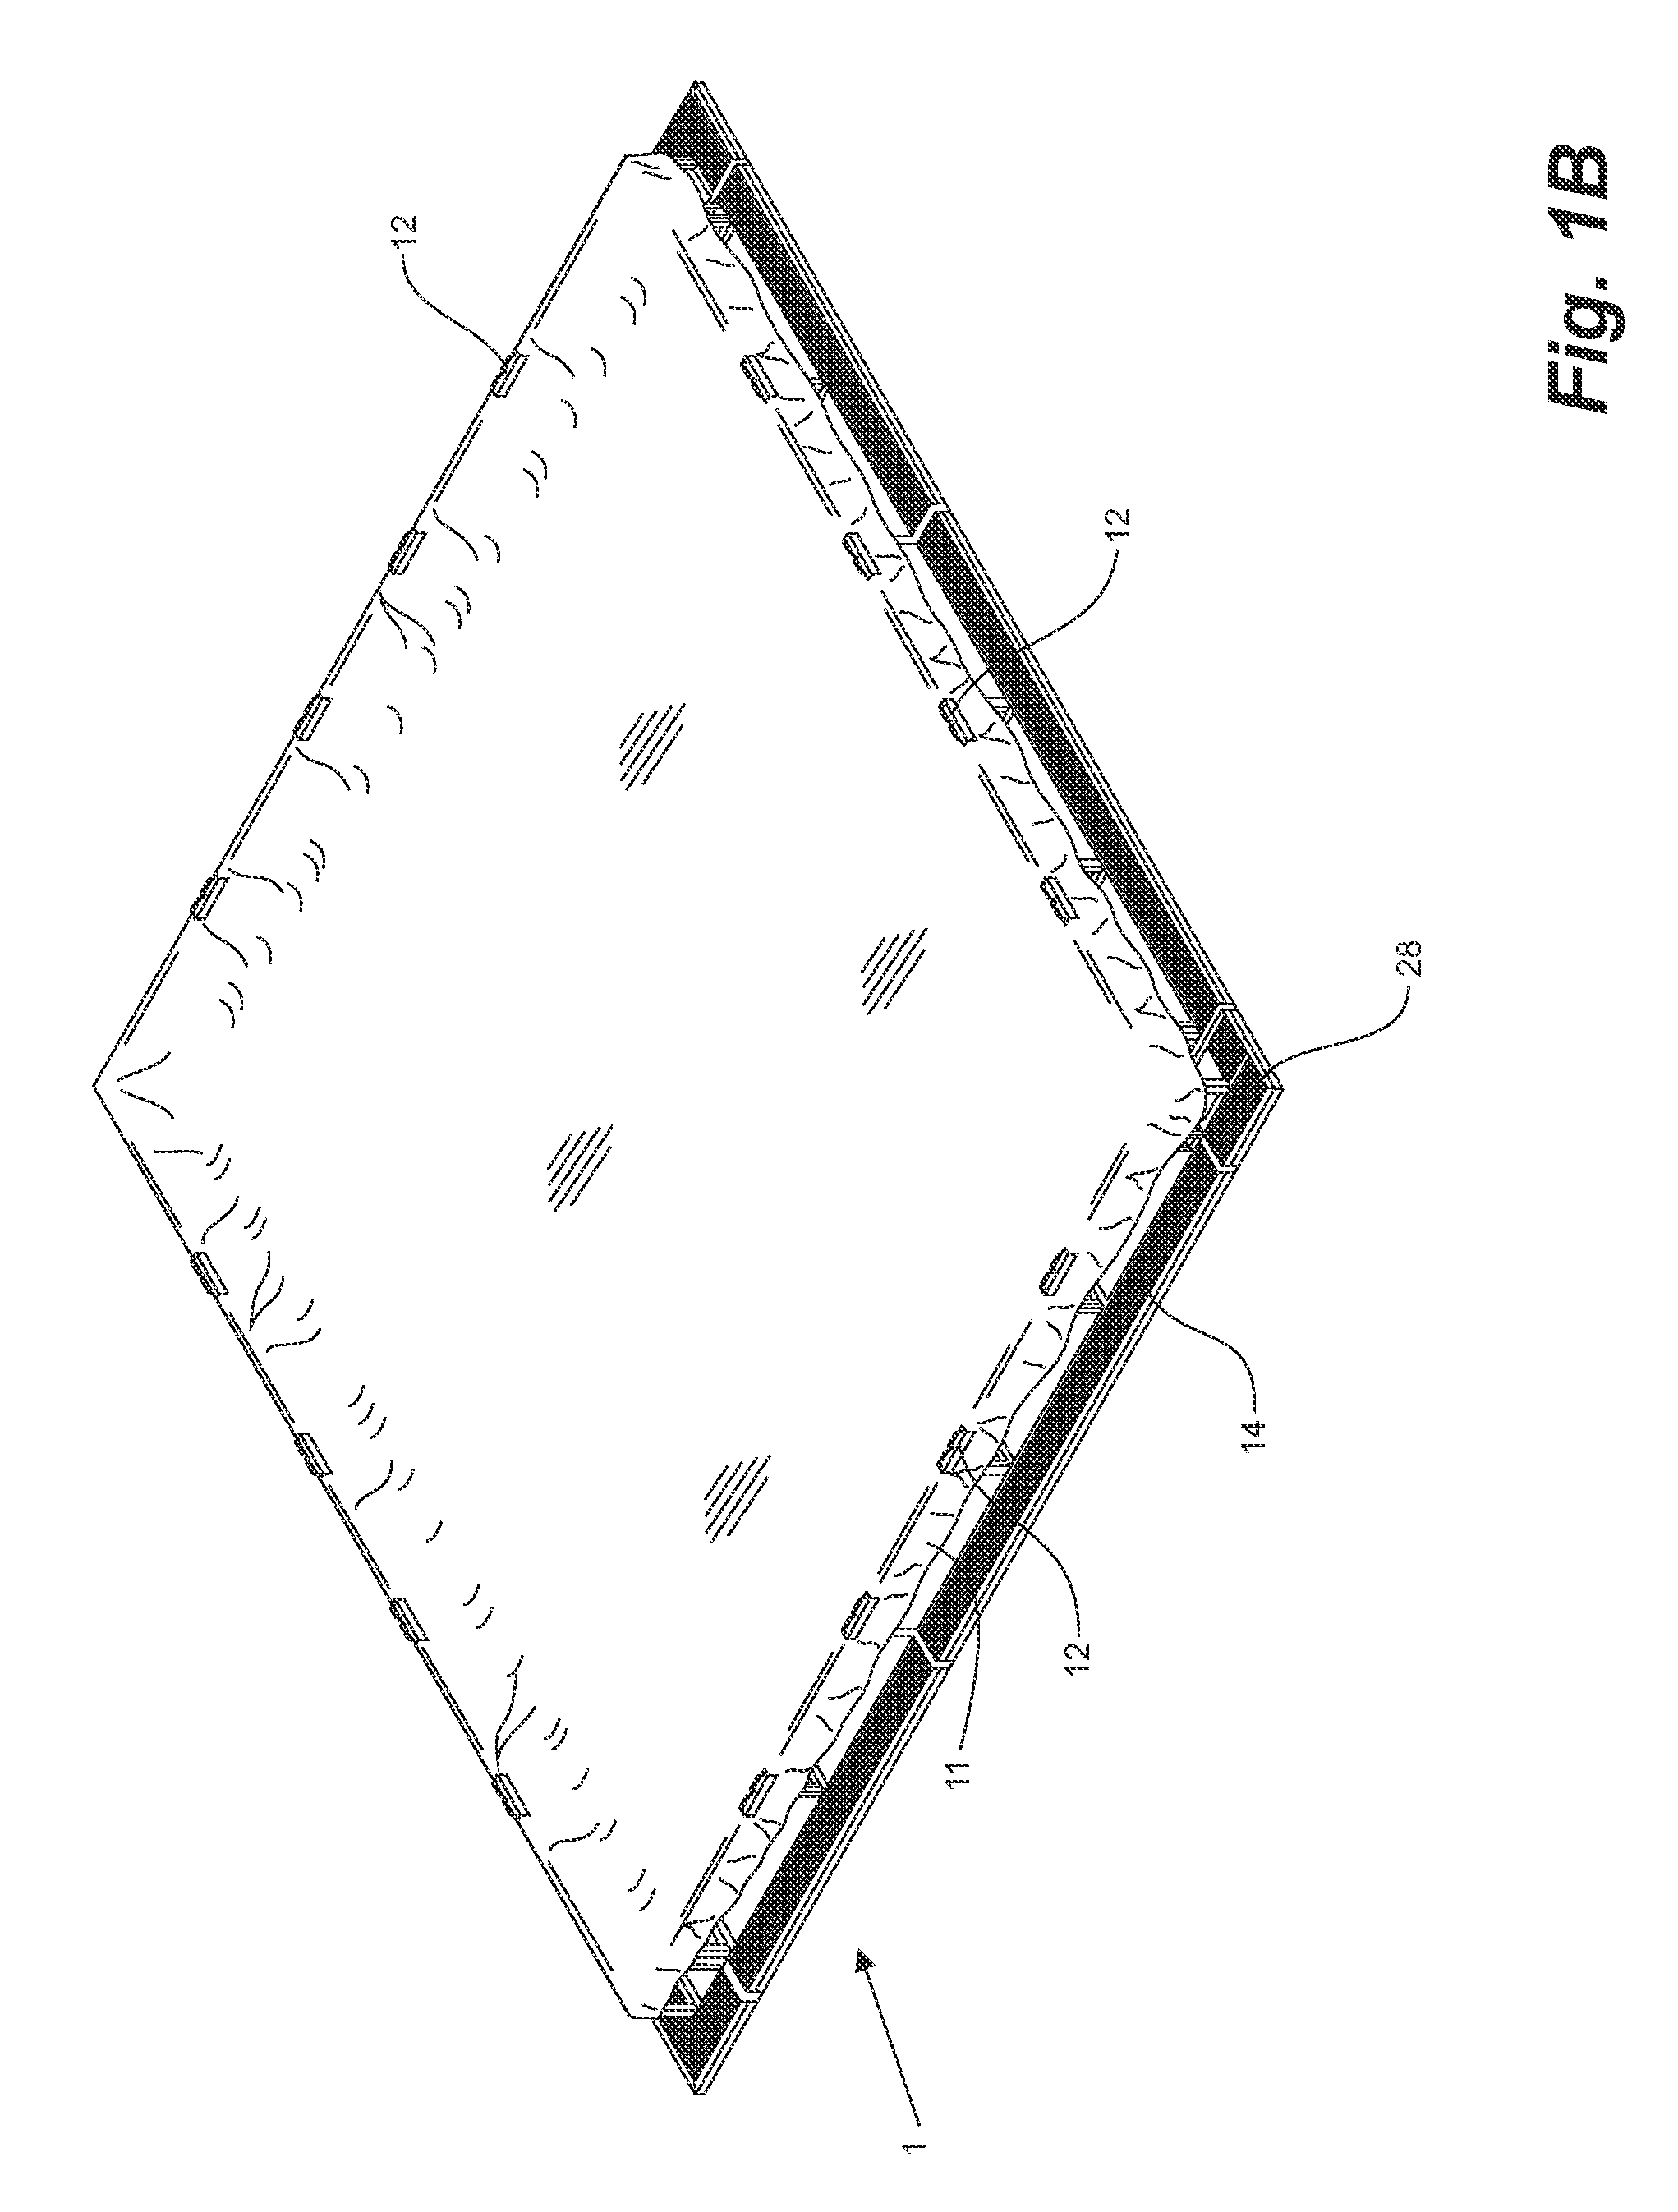 Modular berm system and method of assembly